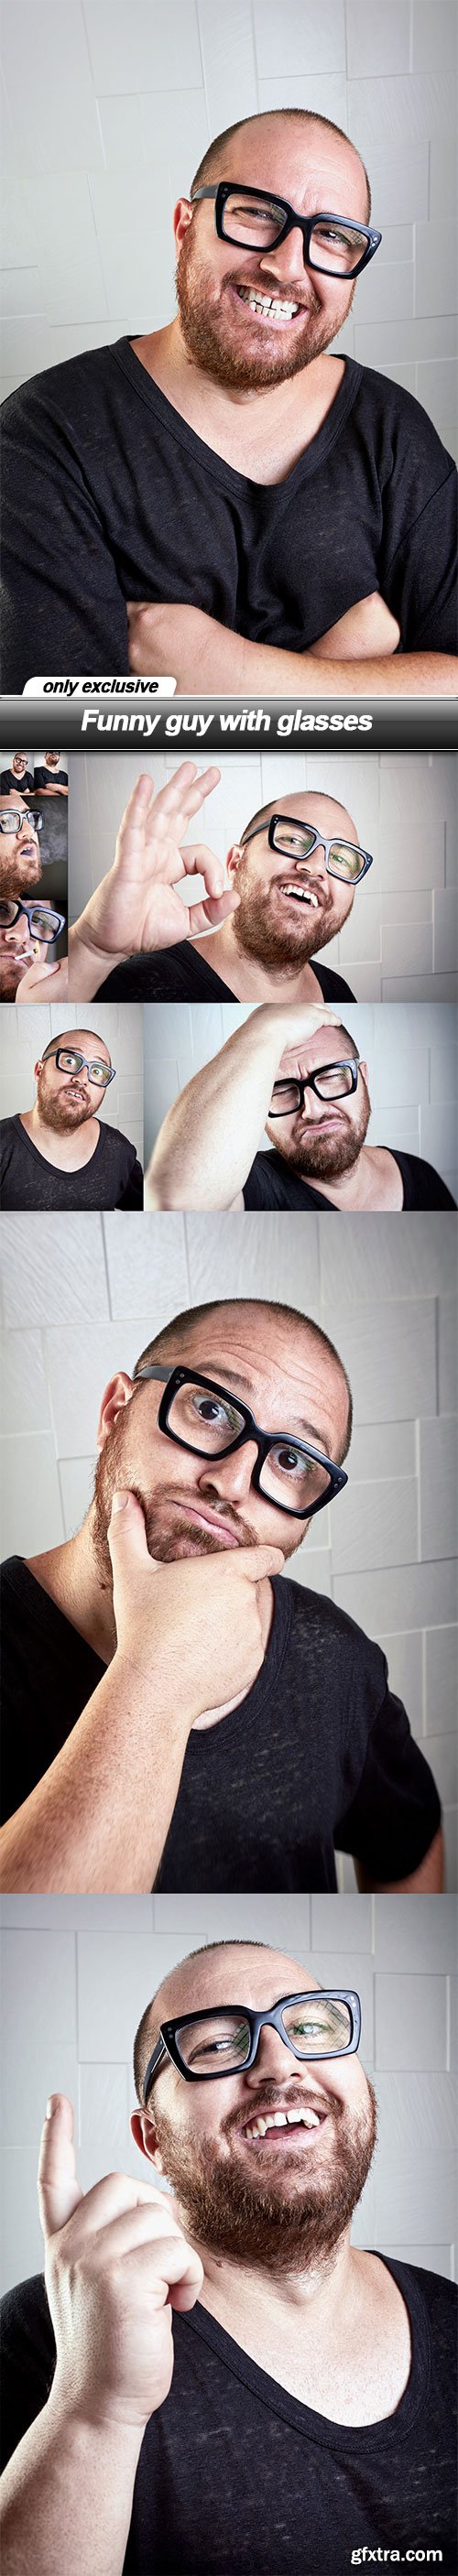 Funny guy with glasses - 9 UHQ JPEG